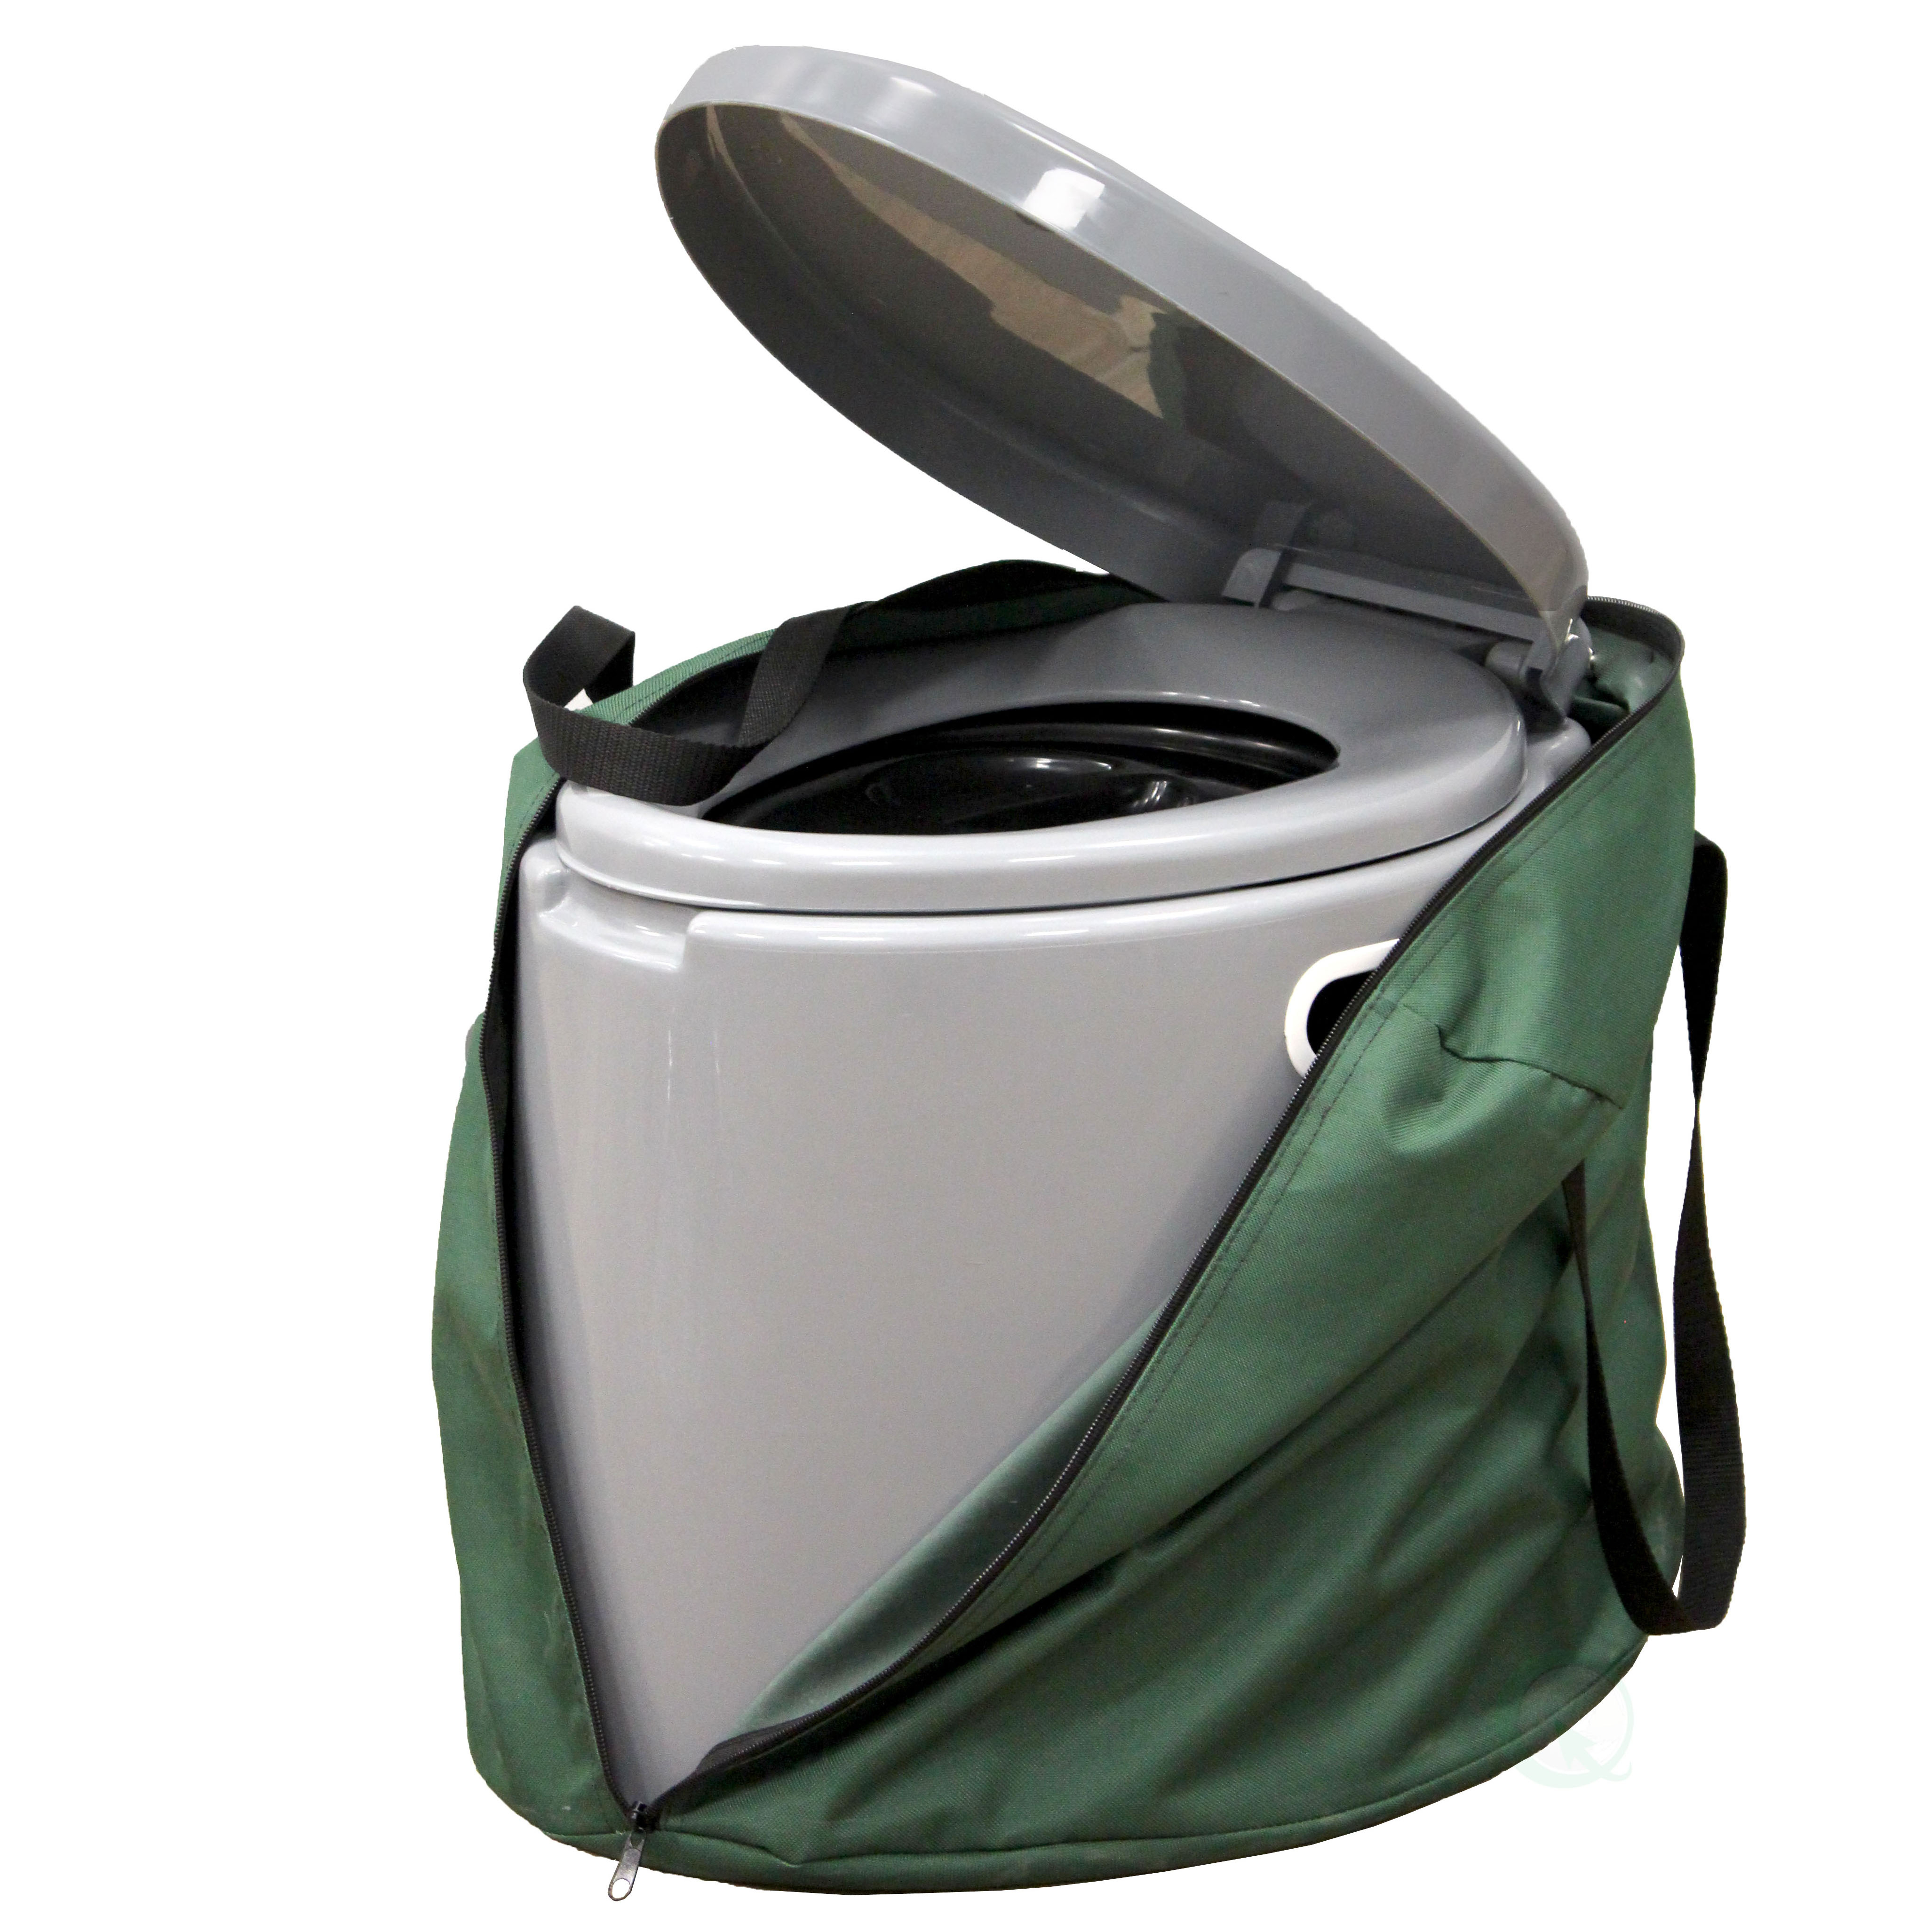 Portable Travel Toilet For Camping And Hiking - Toilet With Case